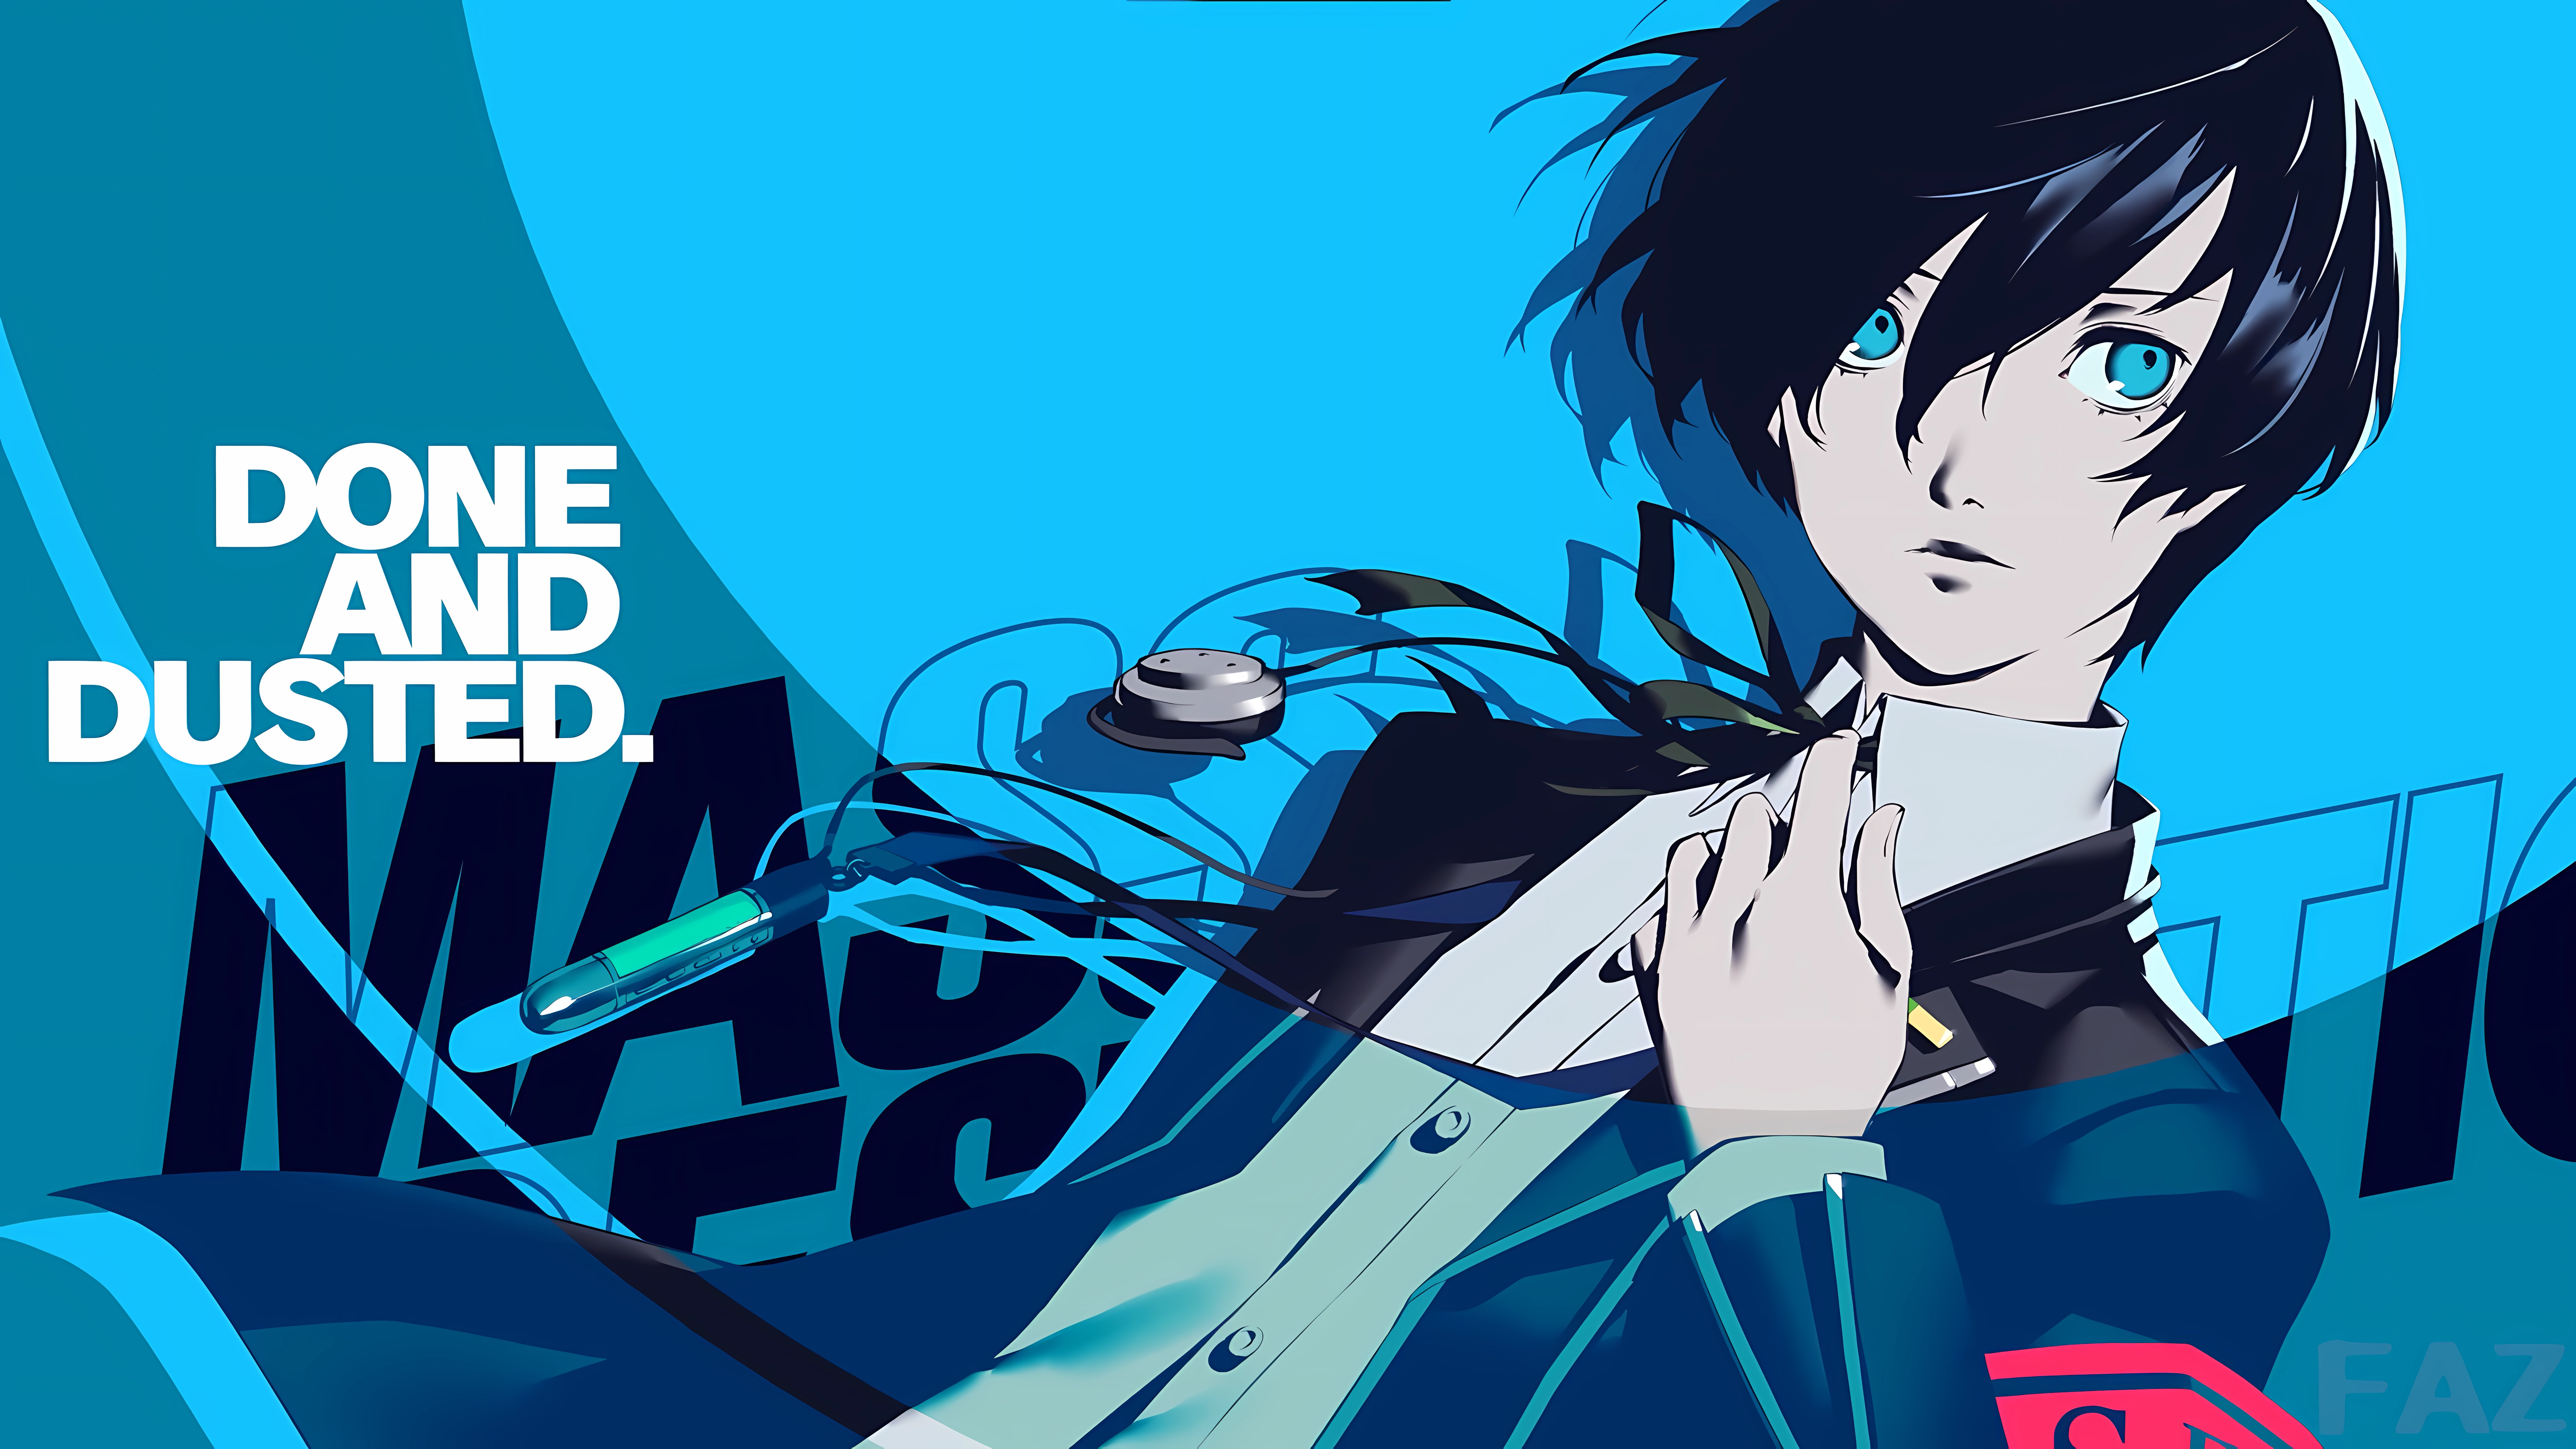 Persona 3 Persona 3 Portable Anime Boys Video Games RPG Japanese Art Video Game Art Persona Series 7680x4320